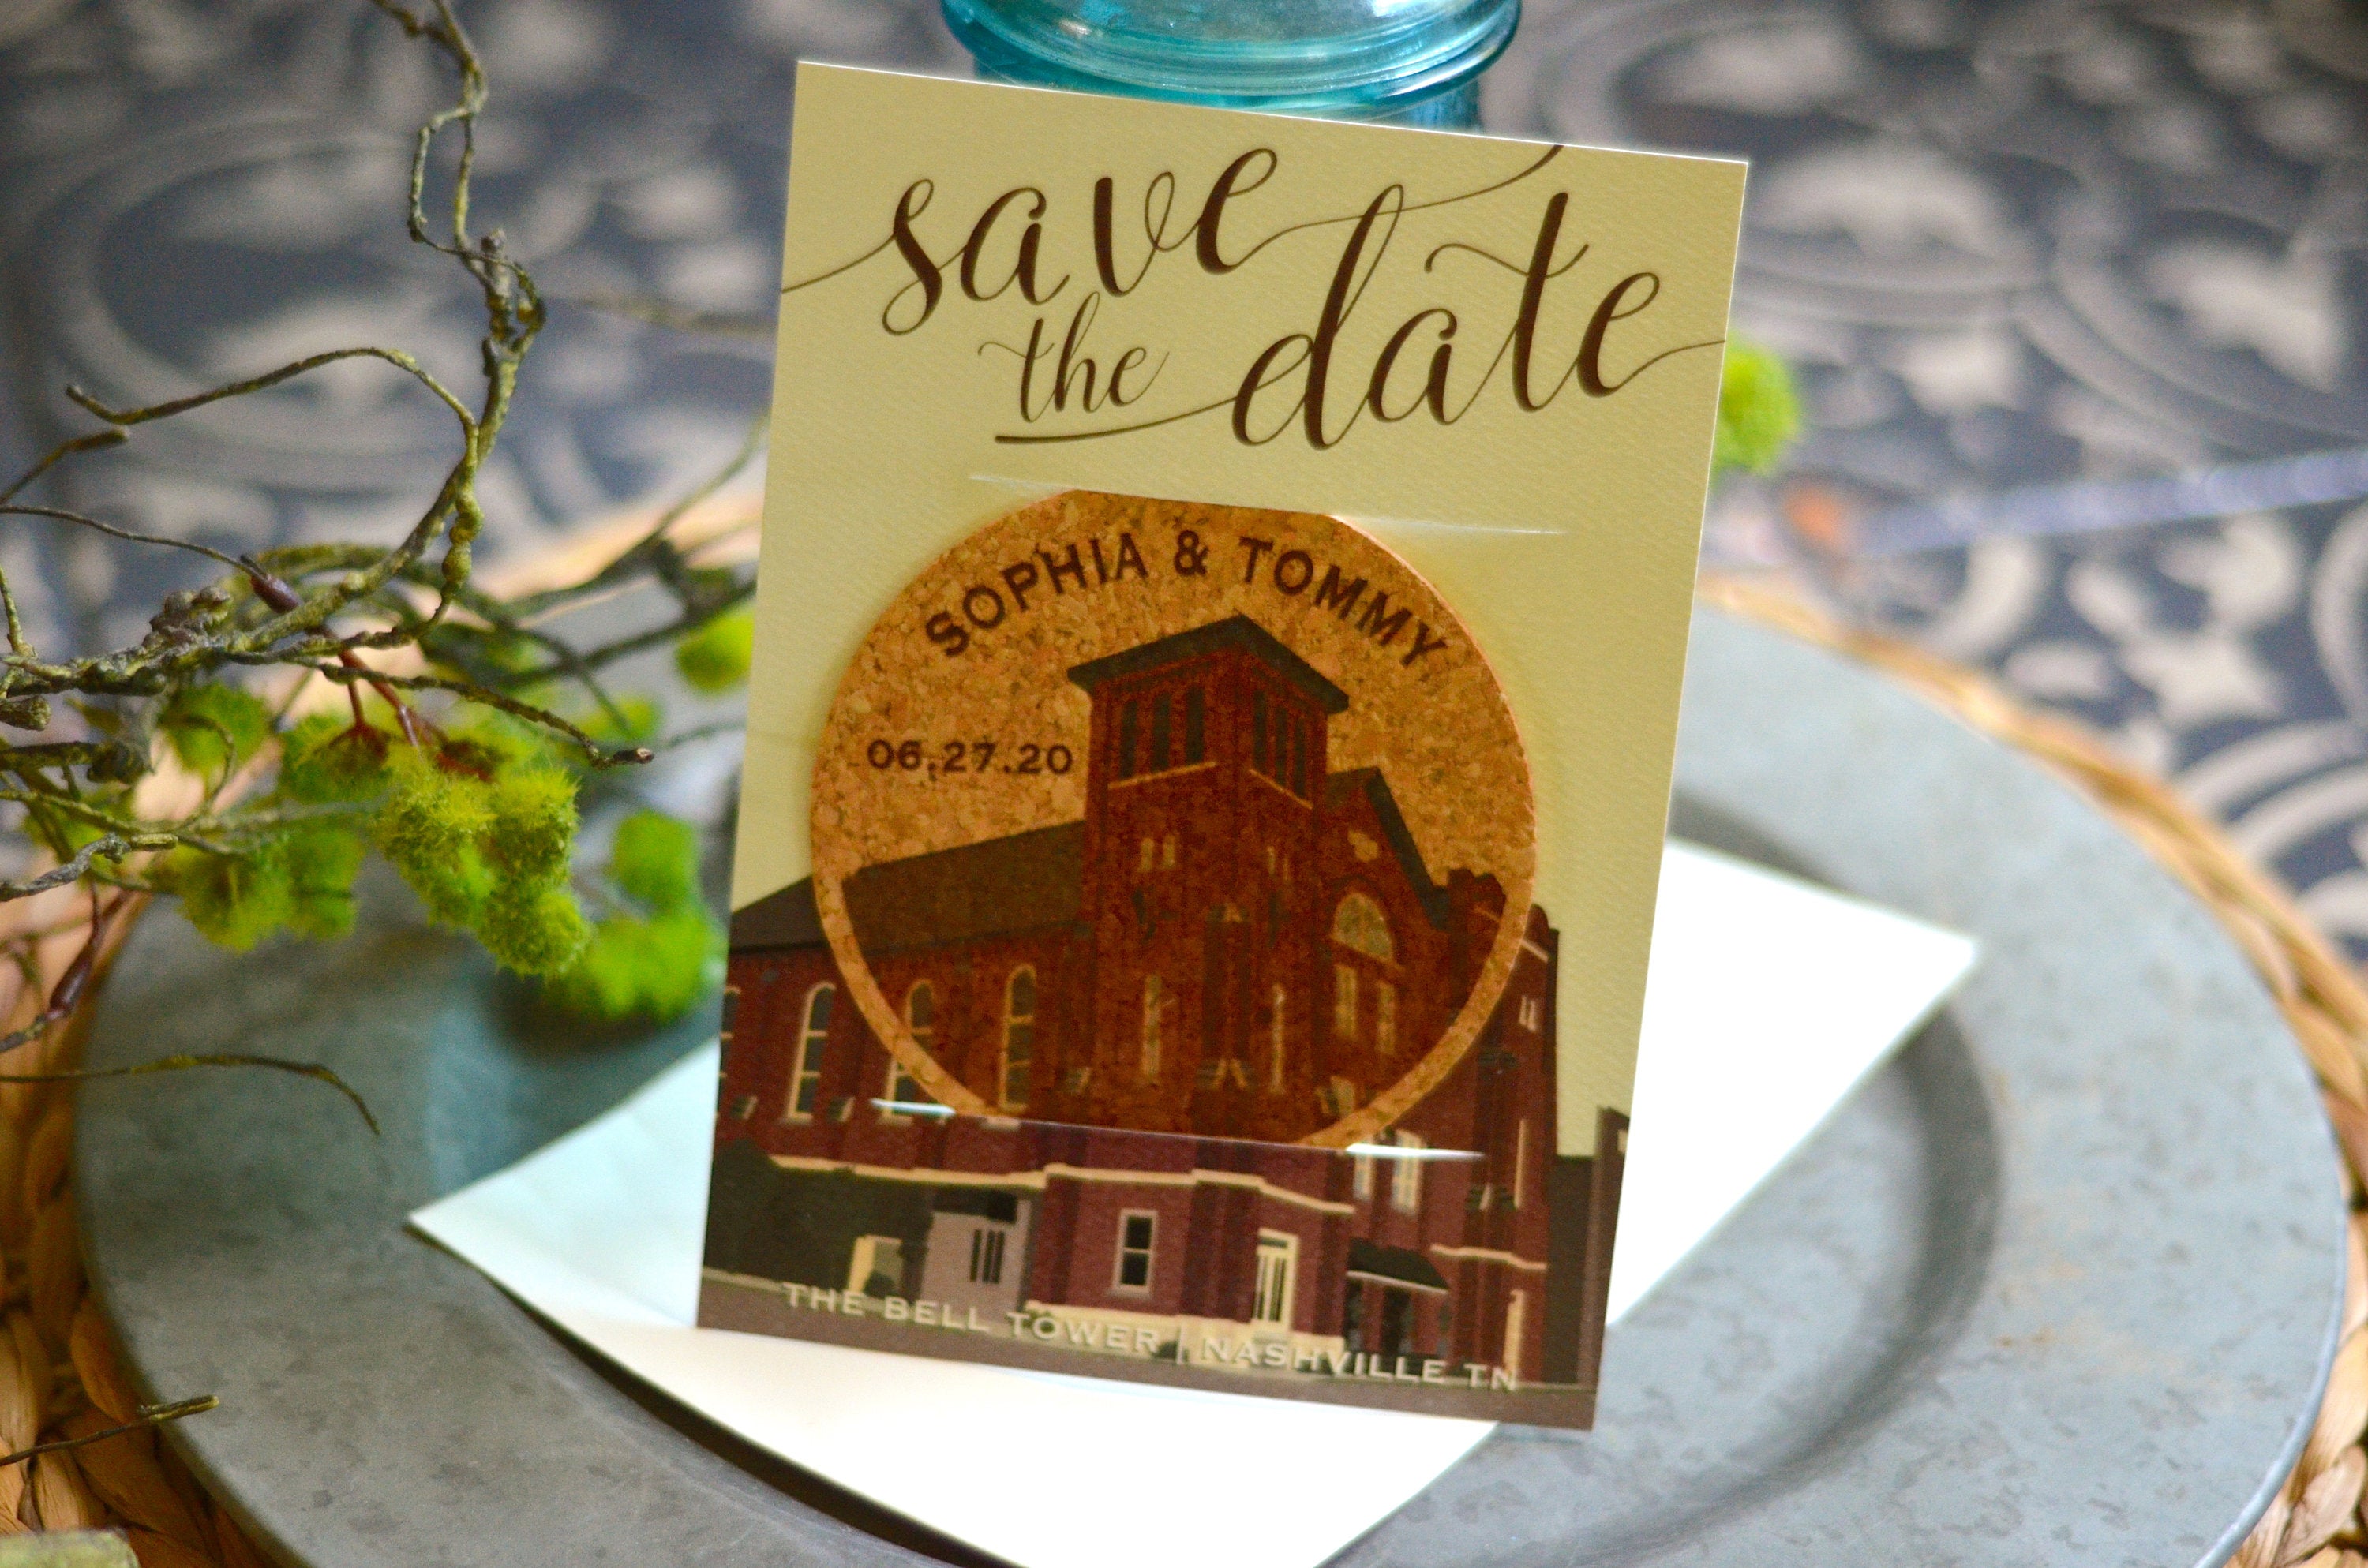 Vintage Bell Tower in Nashville Tennessee Save the Date /Illustrated Bell Tower Cork Coaster Save the Date / Save the Evening Cork Coaster